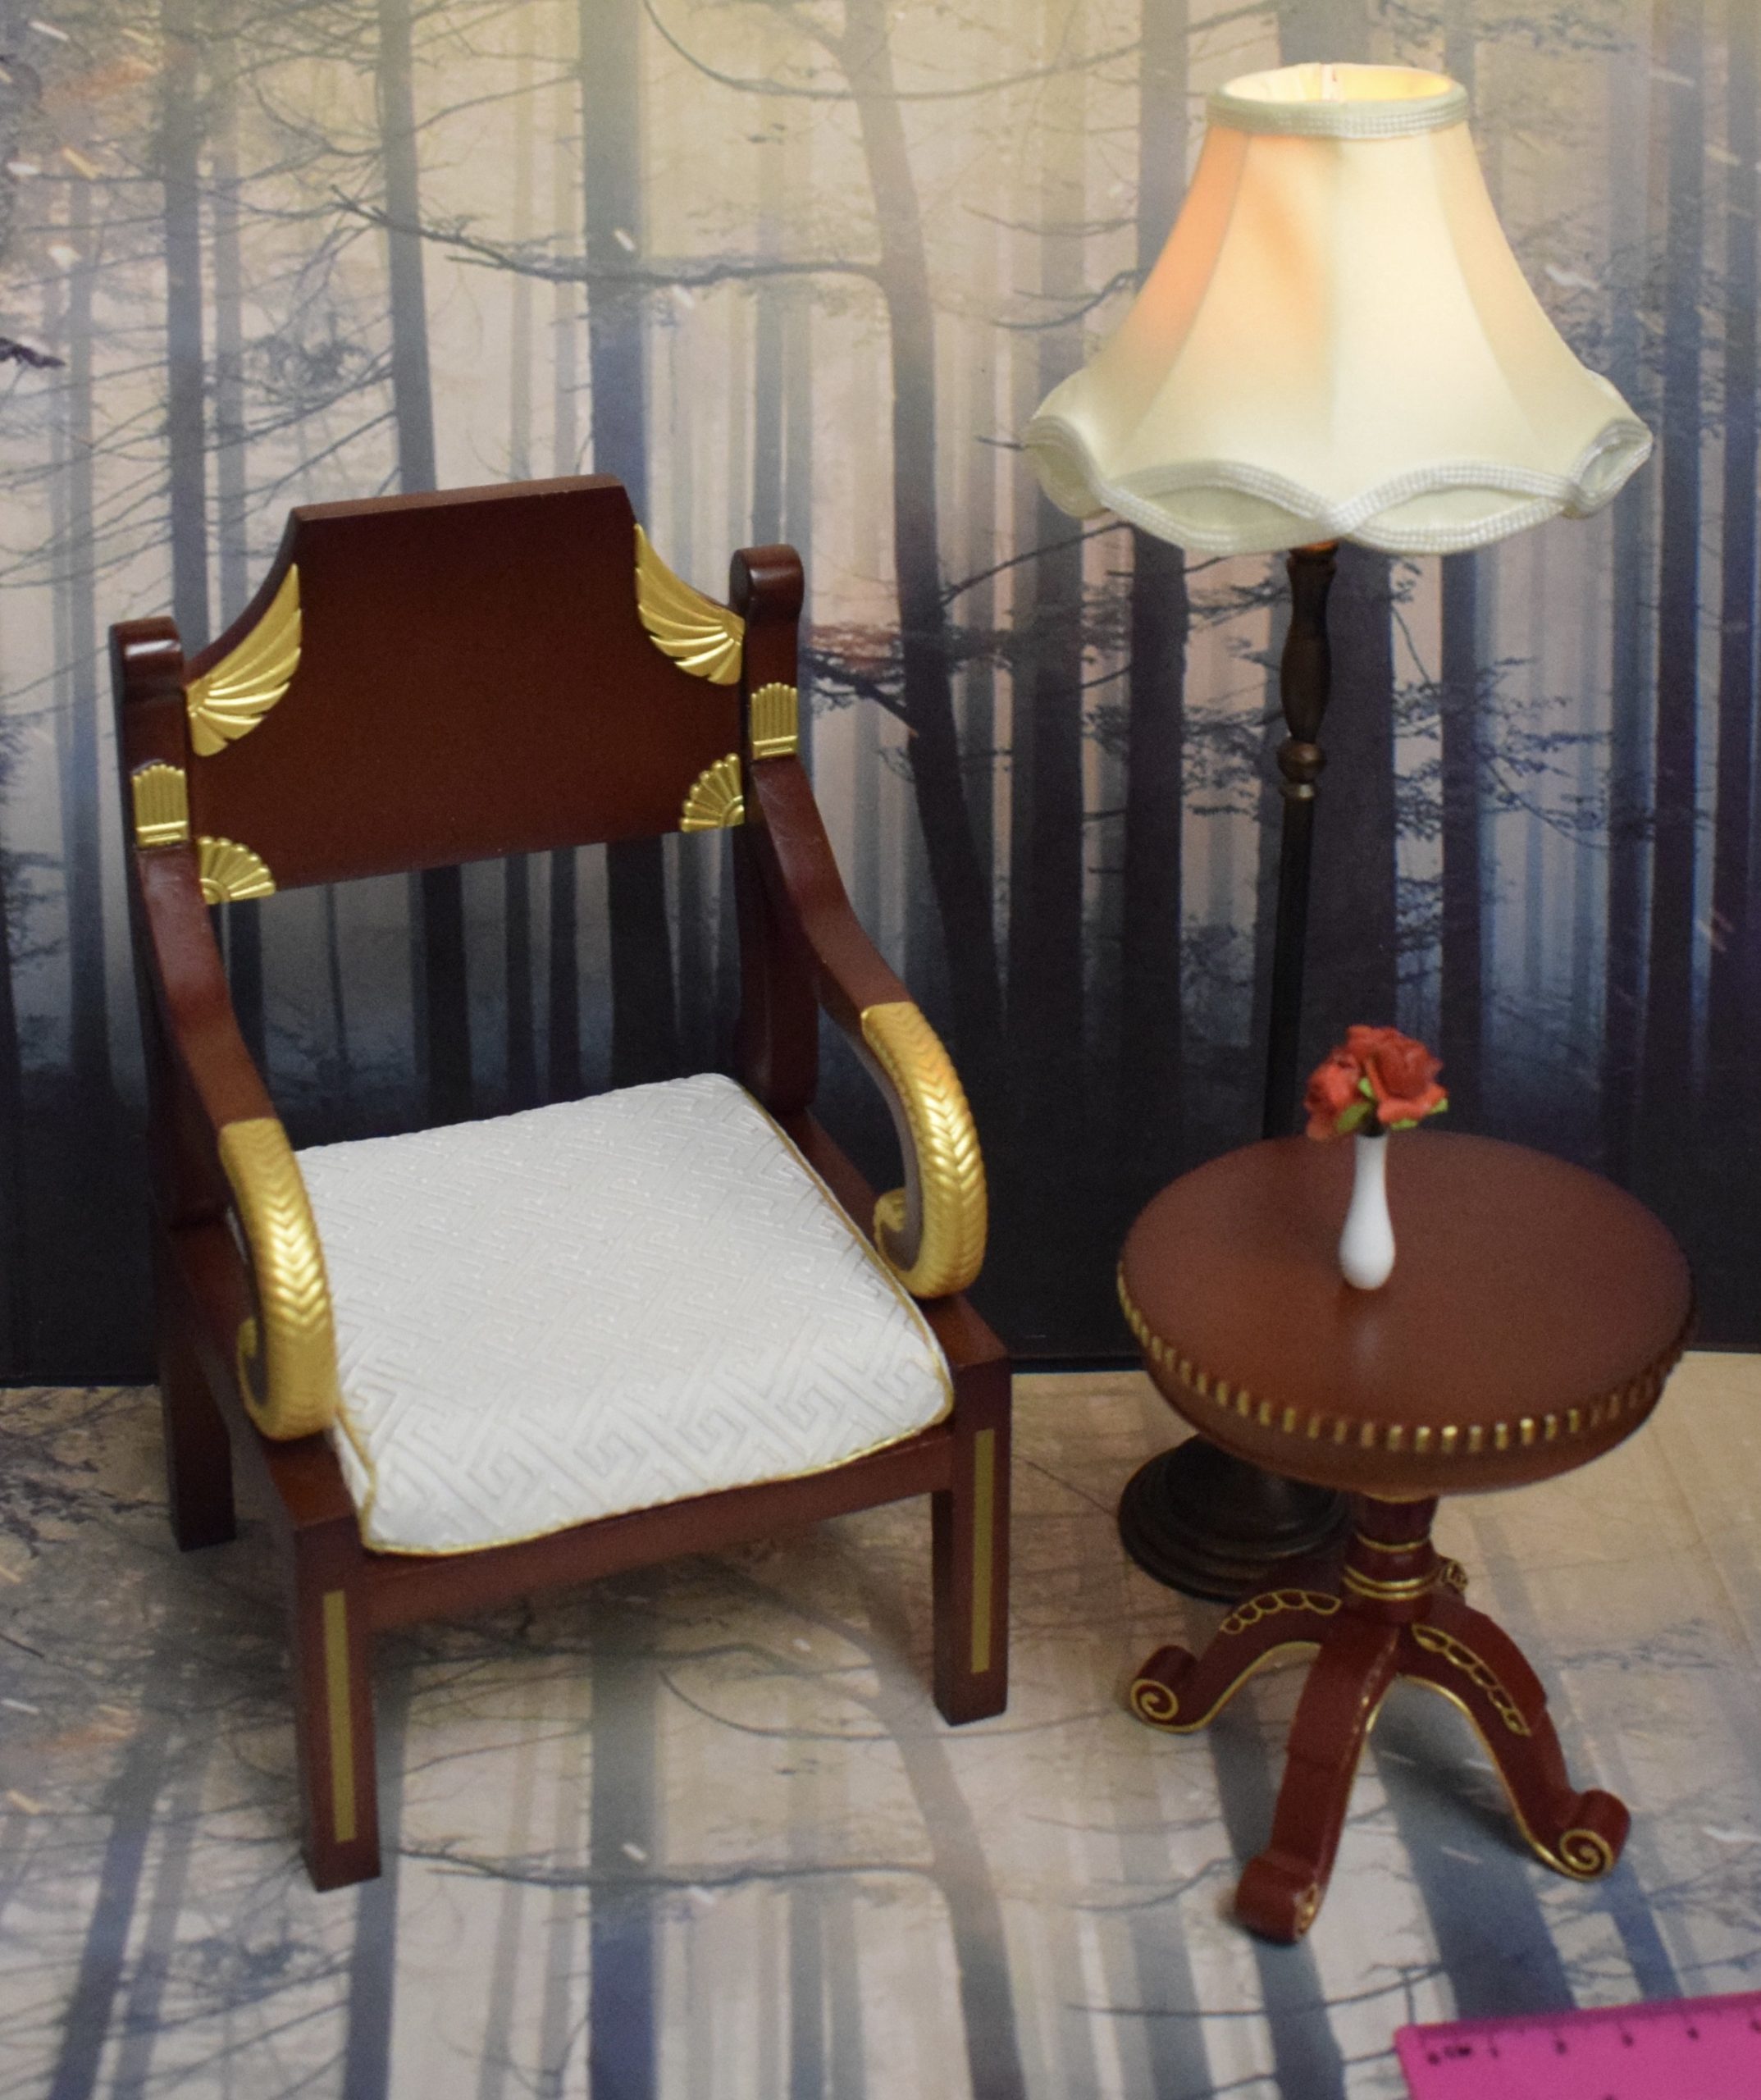 Dragon In Dreams DID 1/6 Scale Modern Table Chair Lamp from Michael Gangster T80128S